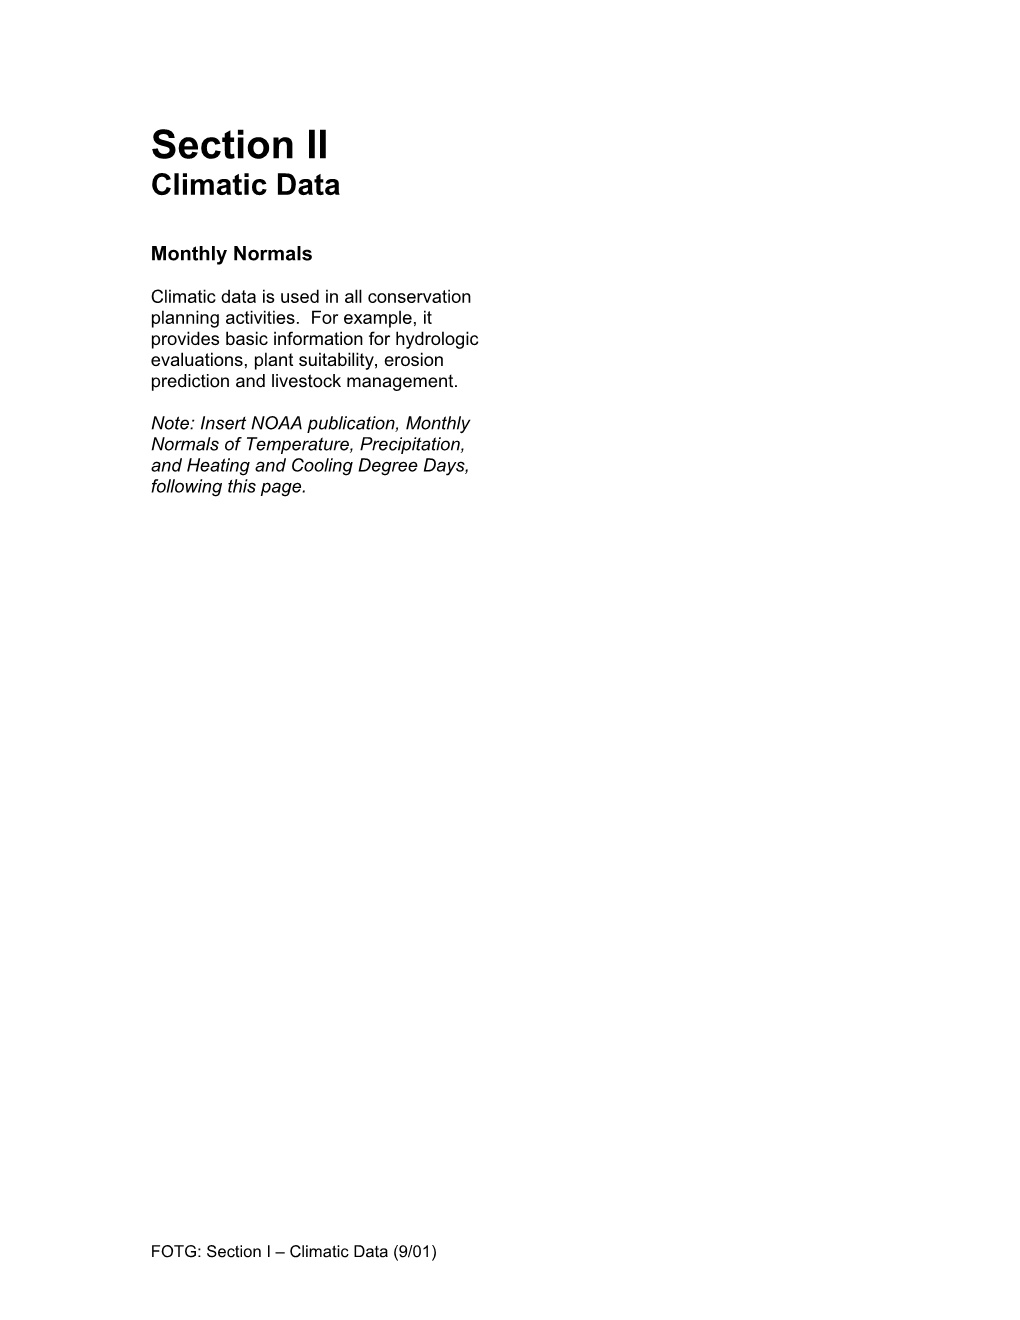 FOTG: Section I - Climatic Data (4/2001) 1